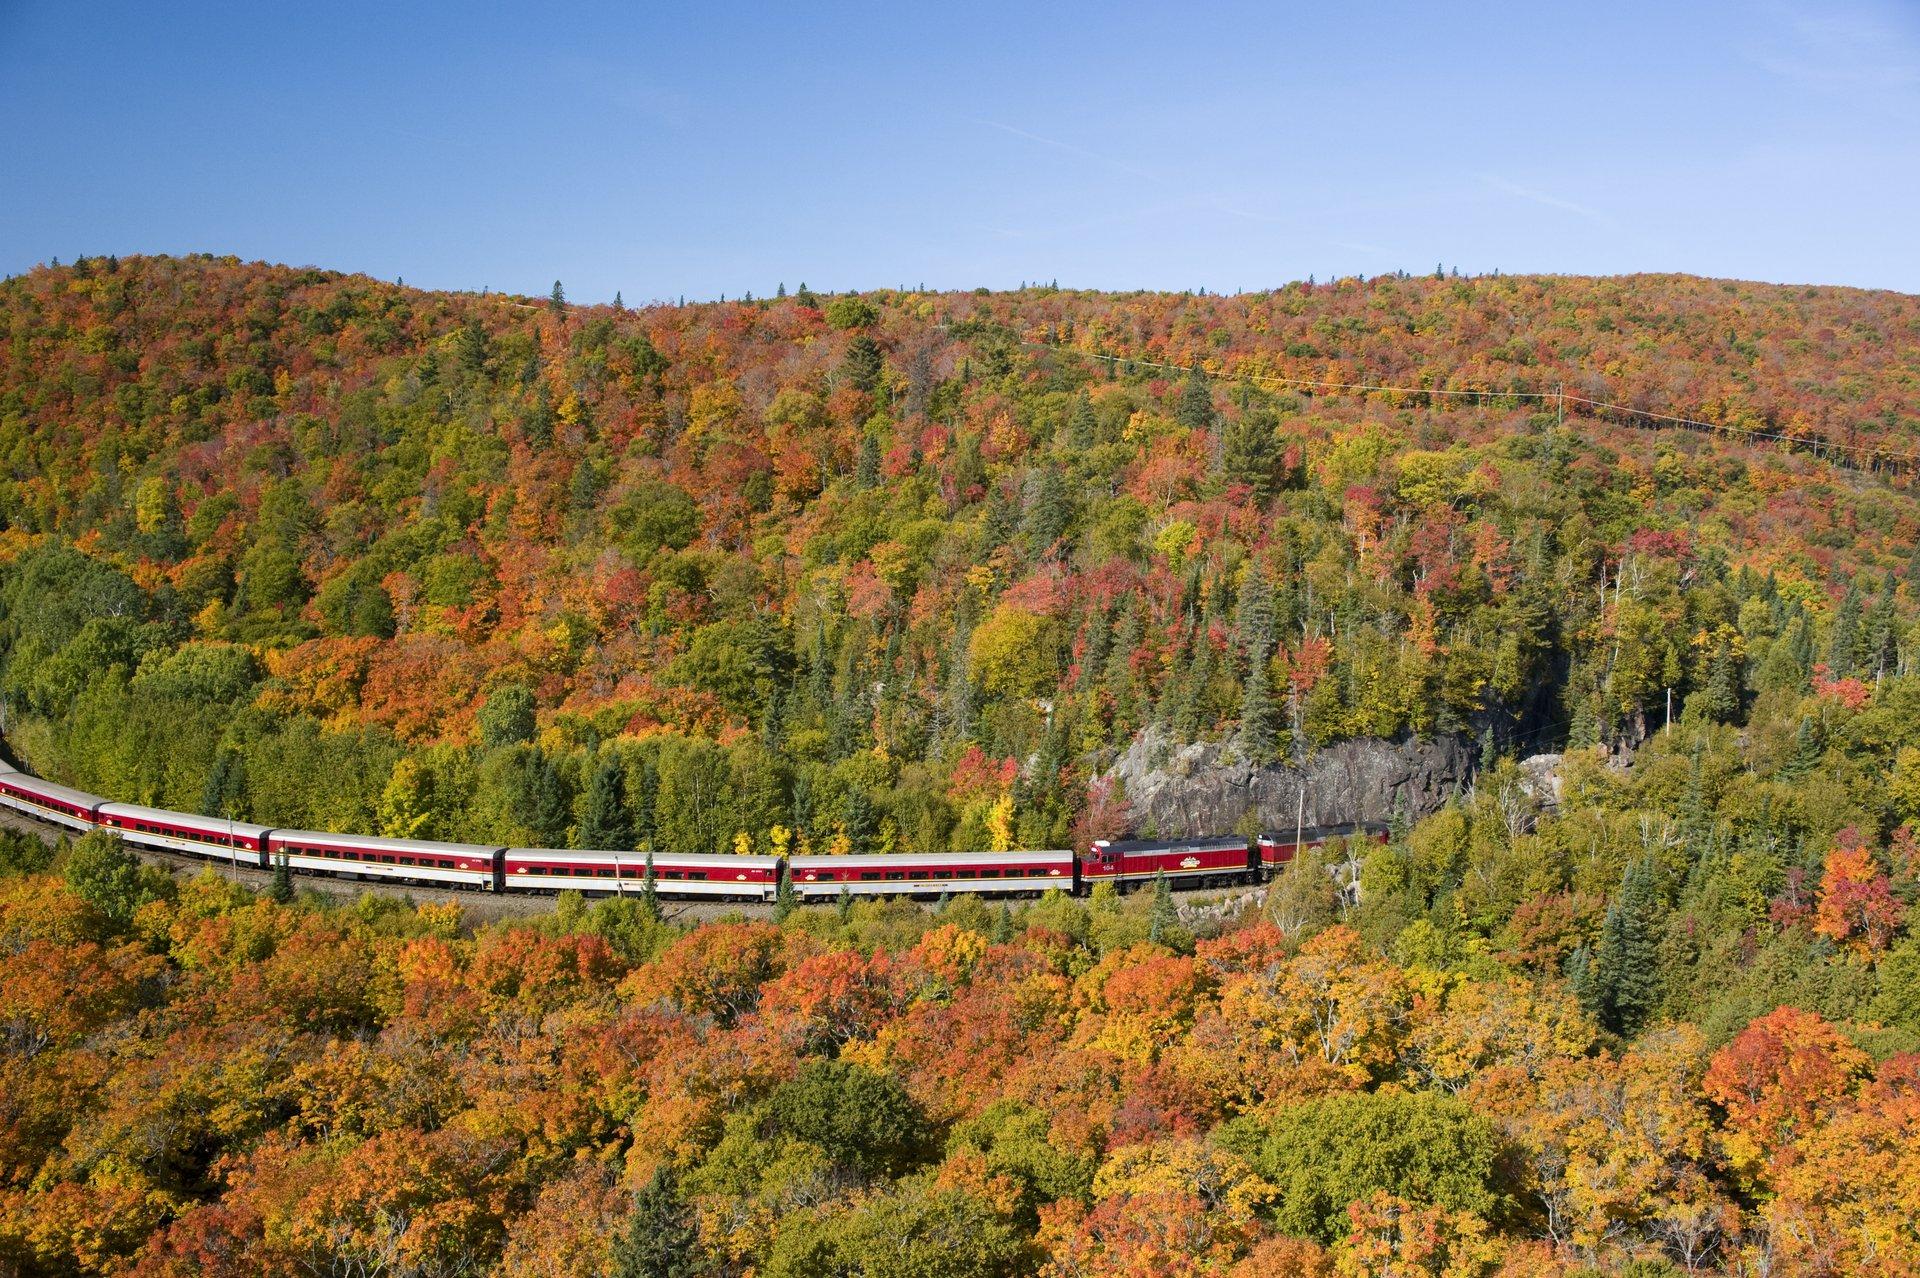 view of train traveling on track with colourful fall foliage